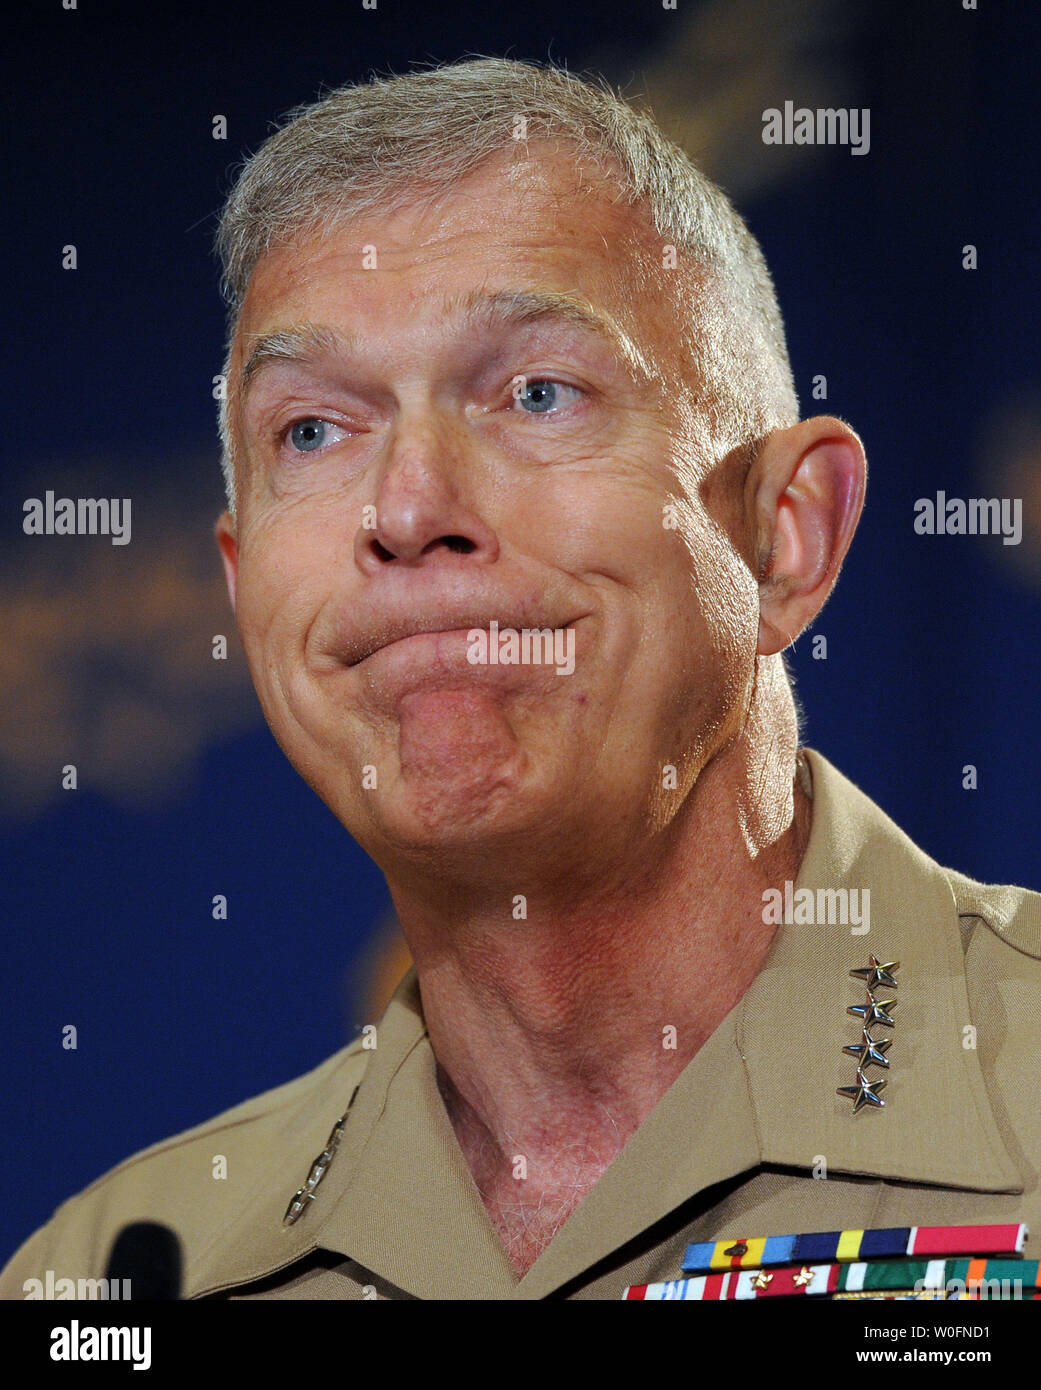 Gen. James Conway, Commandant of the U.S. Marine Corps, speaks during the Navy League Sea-Air-Space Exposition at National Harbor, Maryland, on May 3, 2010.   UPI/Roger L. Wollenberg Stock Photo